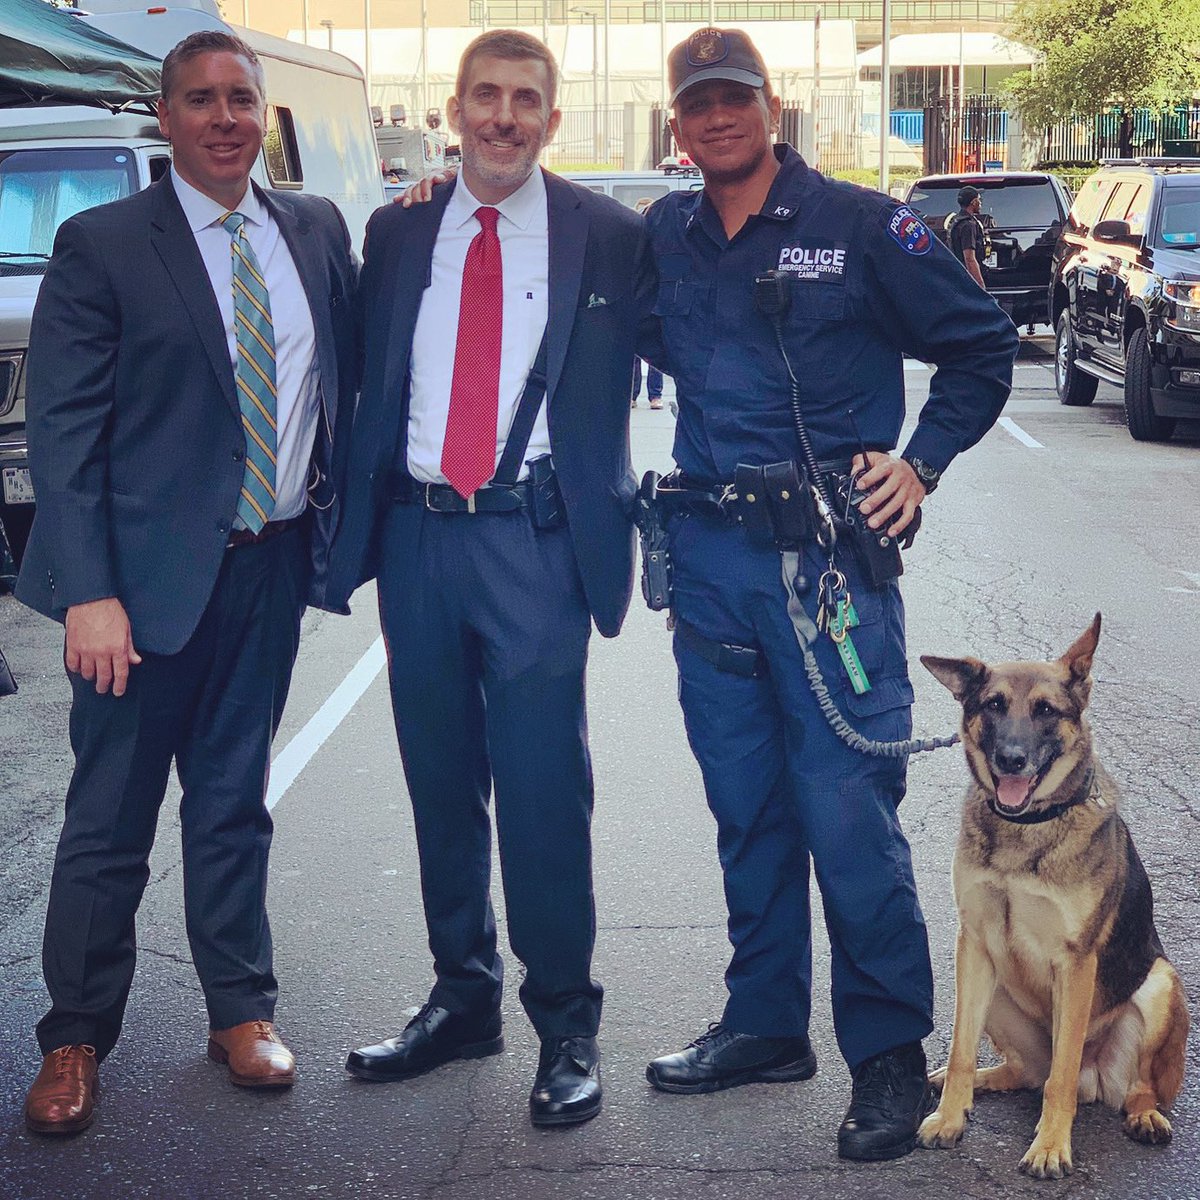 Today is National Law Enforcement Appreciation Day. From the Federal, State & Local levels, we are always ready to serve & protect. Proud to call these guys my brothers. To the men, women & our 4 legged friends, thank you.
💙 👮‍♂️ 👮 🐴 🐕

#nationallawenforcementappreciationday